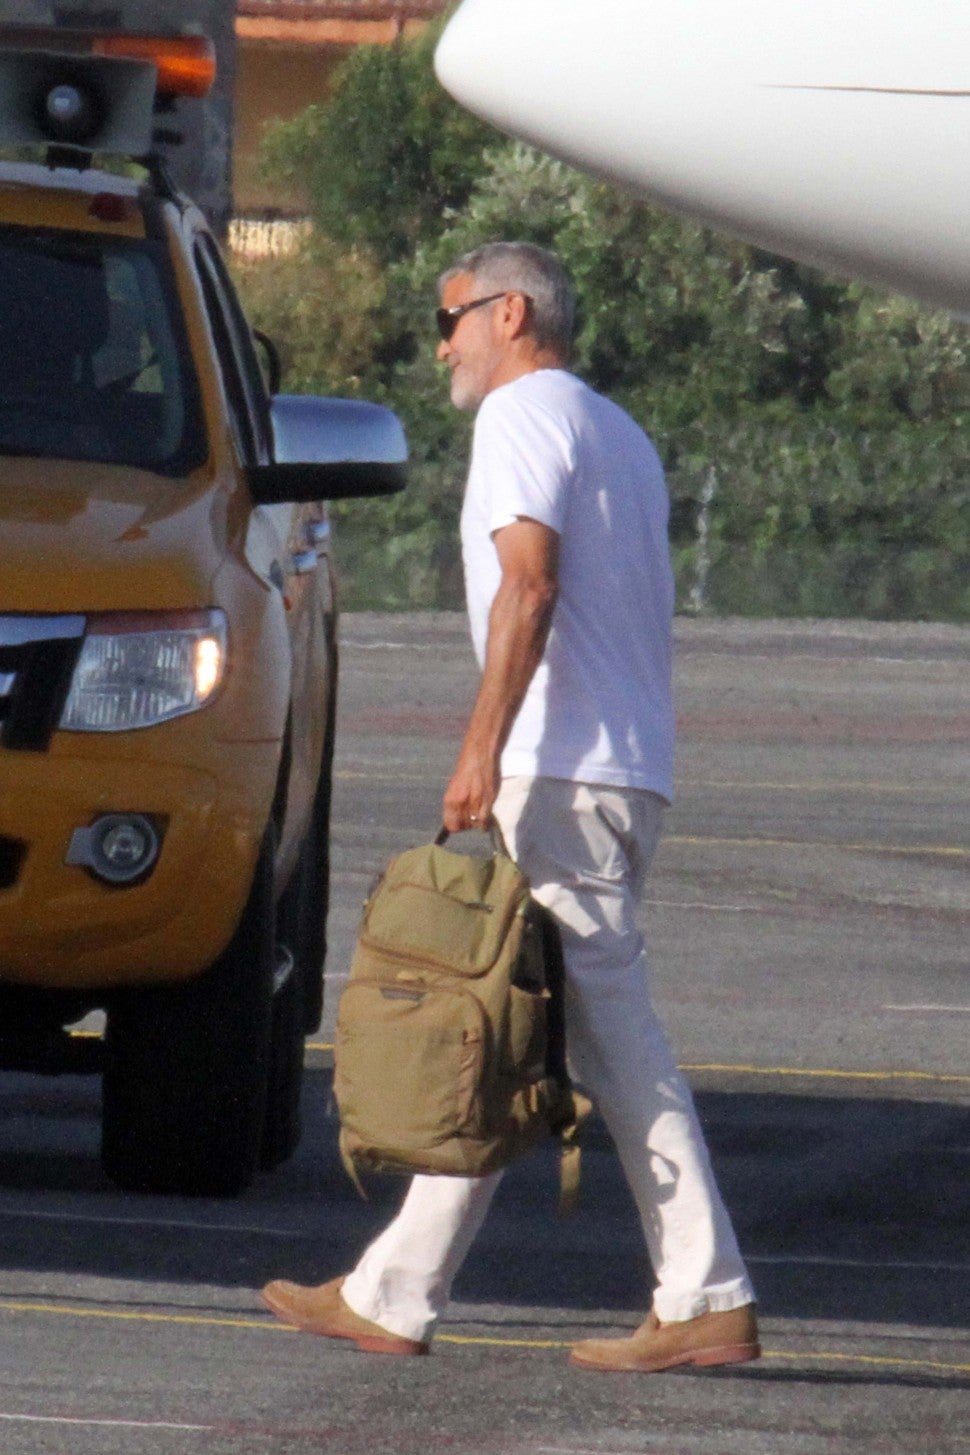 George Clooney walks unassisted at an airport in Rome 5 days after scooter accident